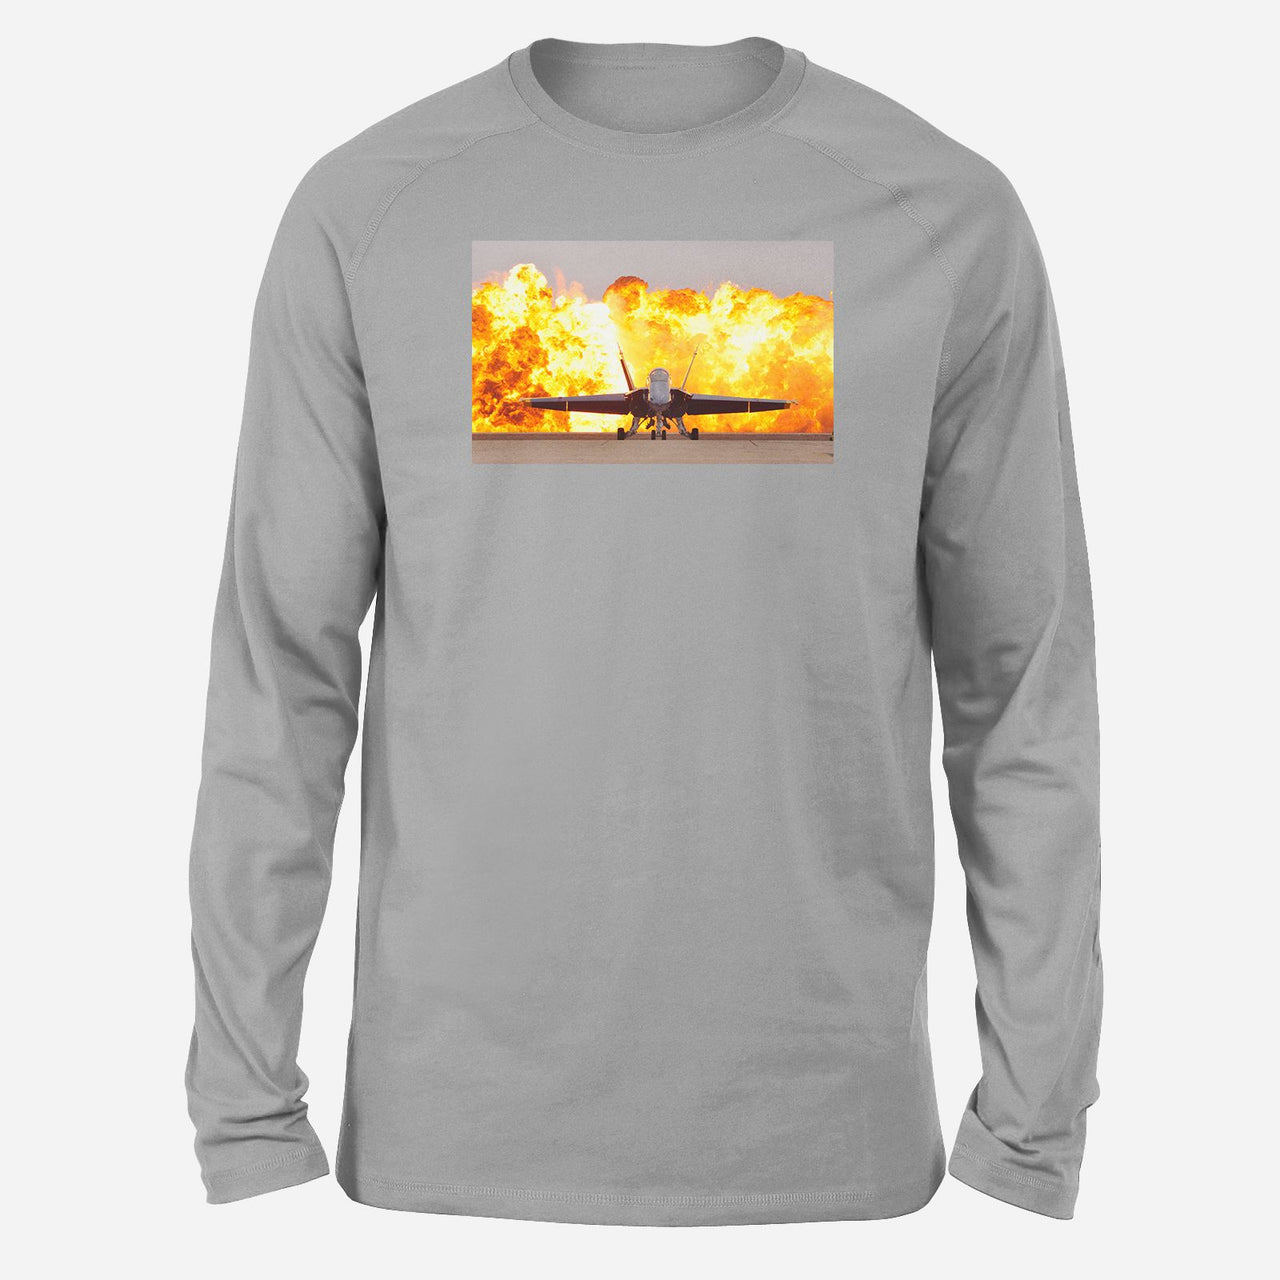 Face to Face with Air Force Jet & Flames Designed Long-Sleeve T-Shirts